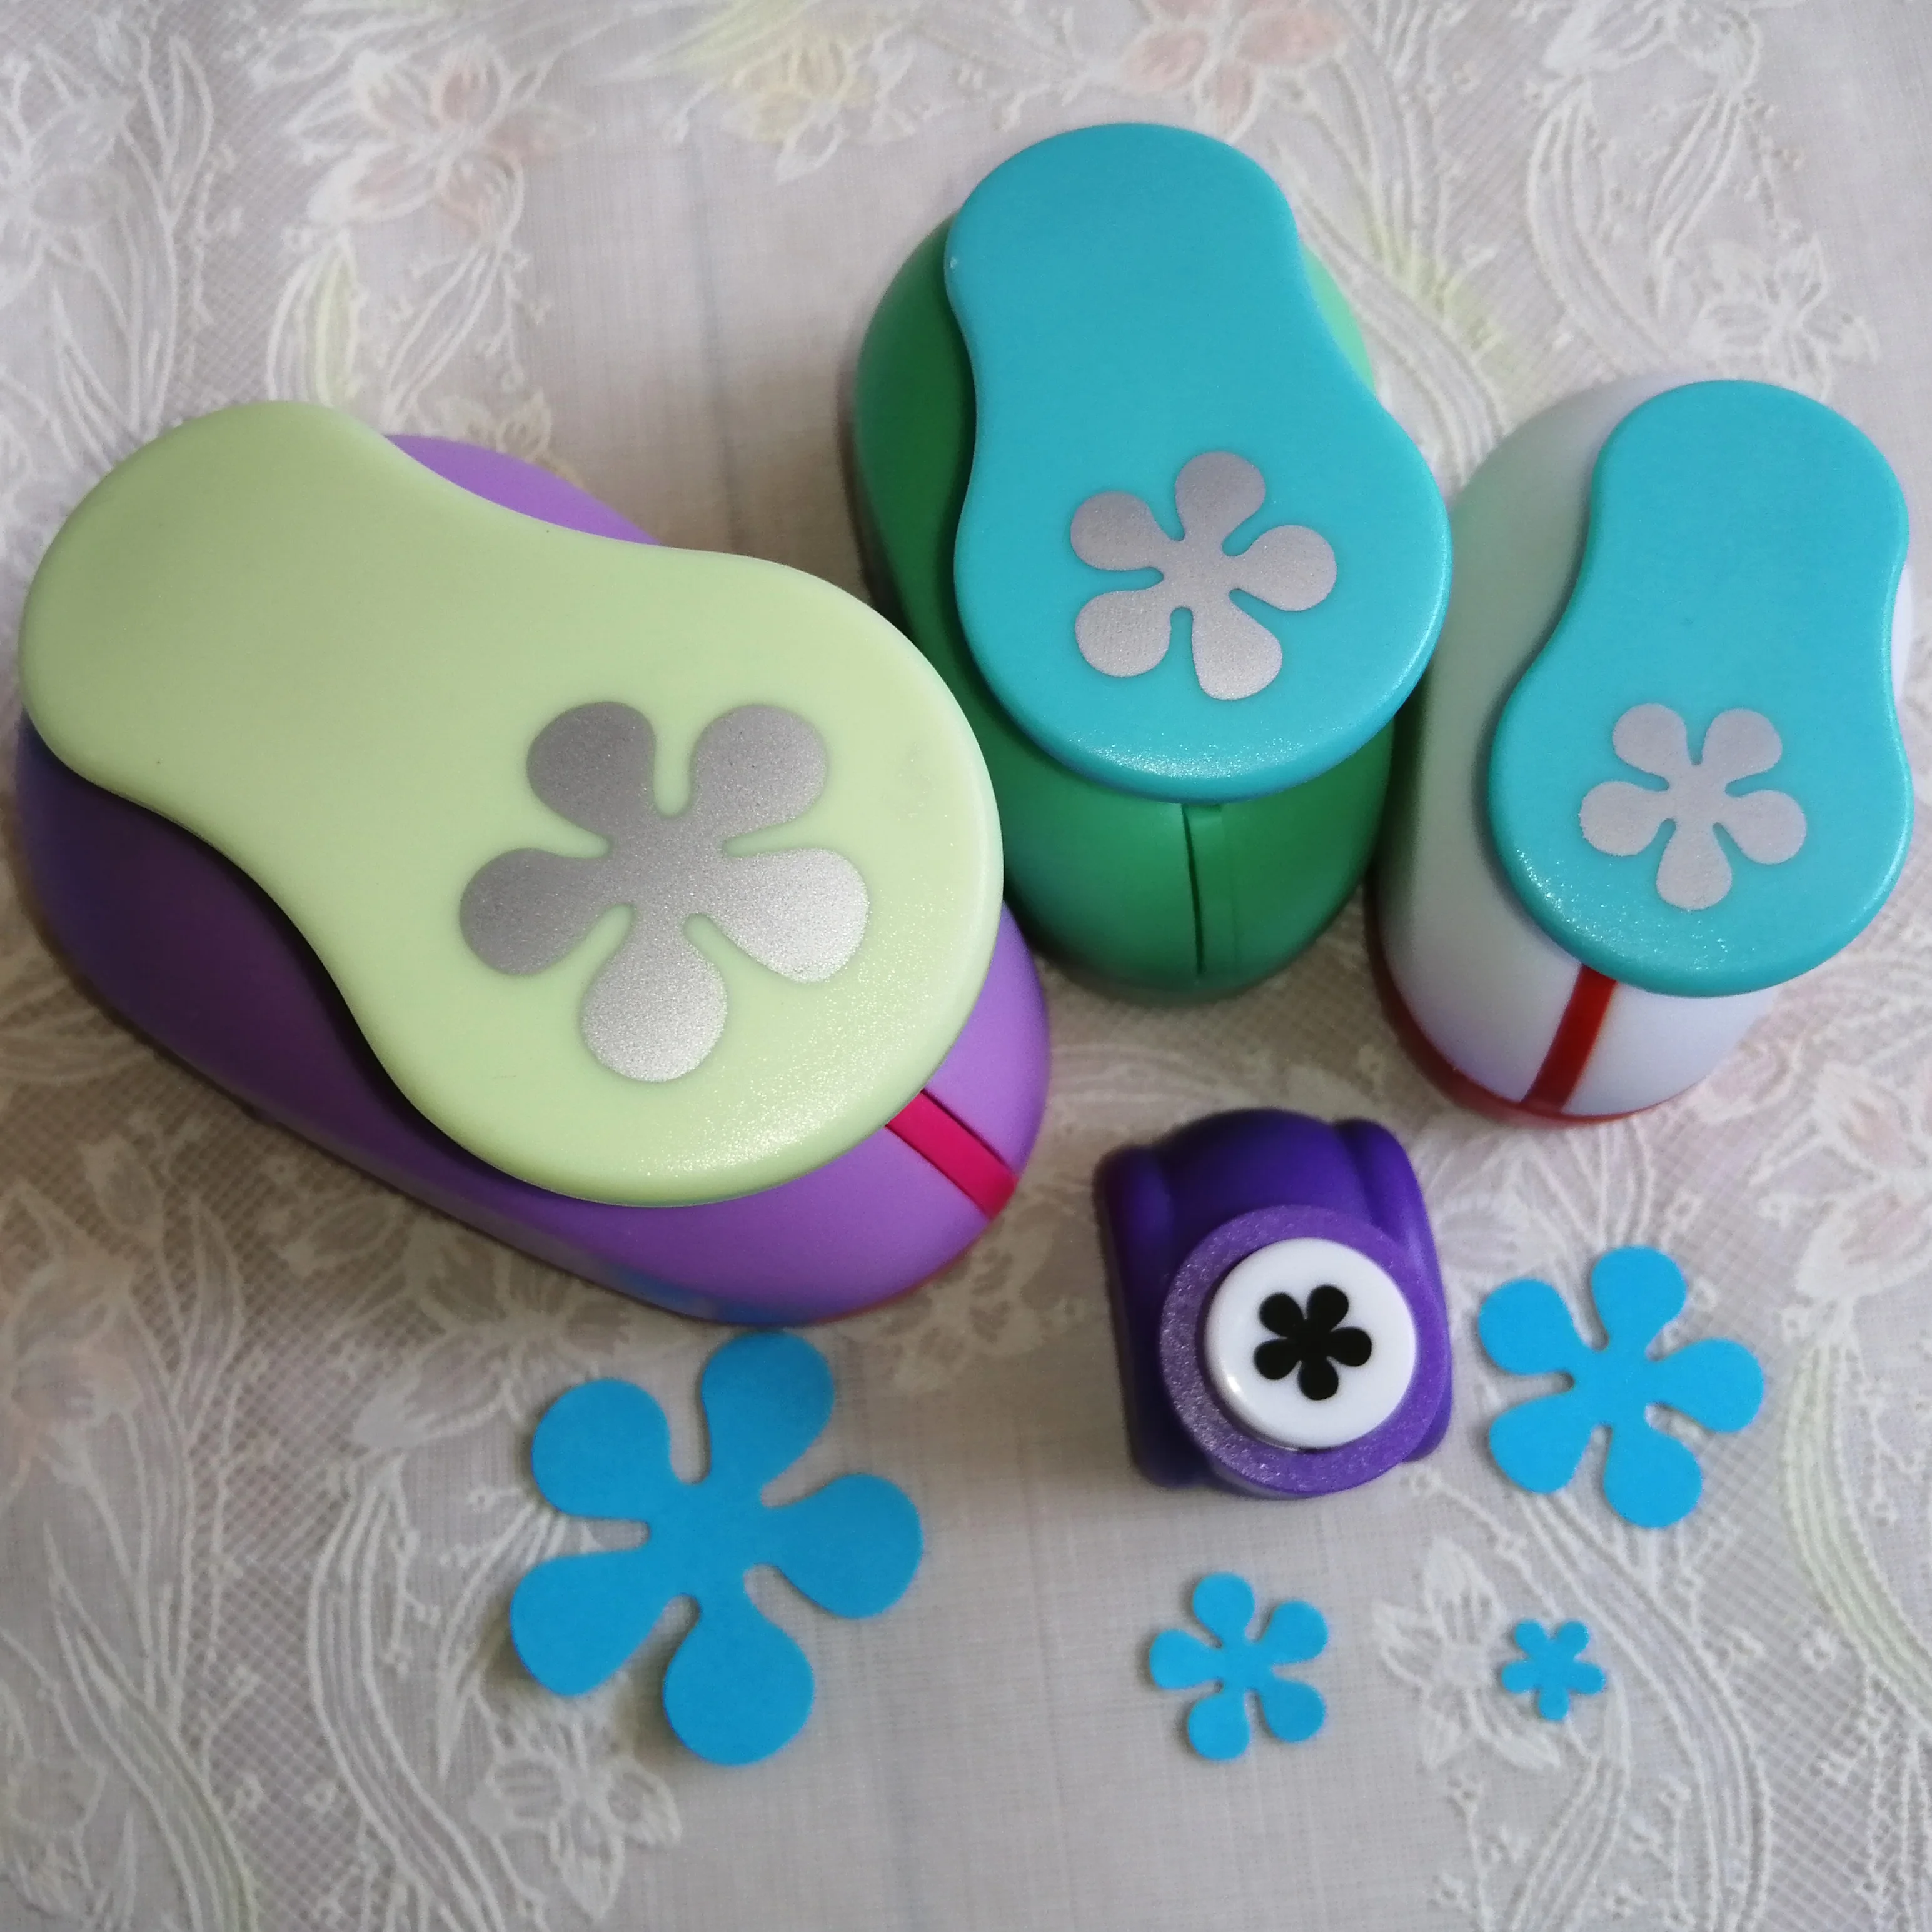 Free Shipping 3 Inch Paper Punch 4 Pieces Of Flower For Eva Foam